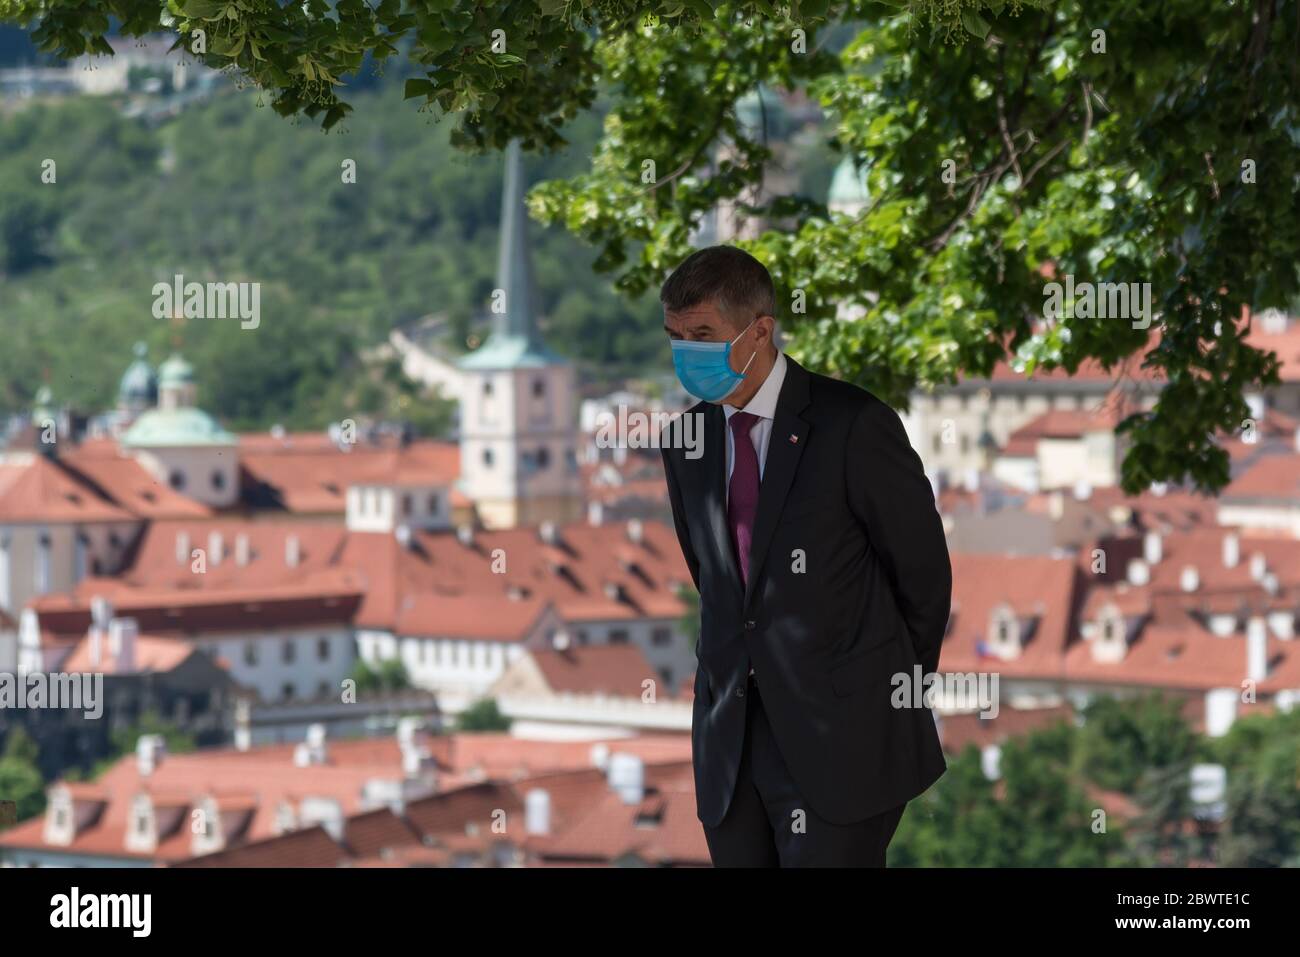 Prague, Czech Republic. 03rd June, 2020. Prime minister of Czech republic Andrej  Babis is seen wearing a face mask as he waits for Igor Matovic his  counterpart from Slovakia.Prime minister of Slovakia